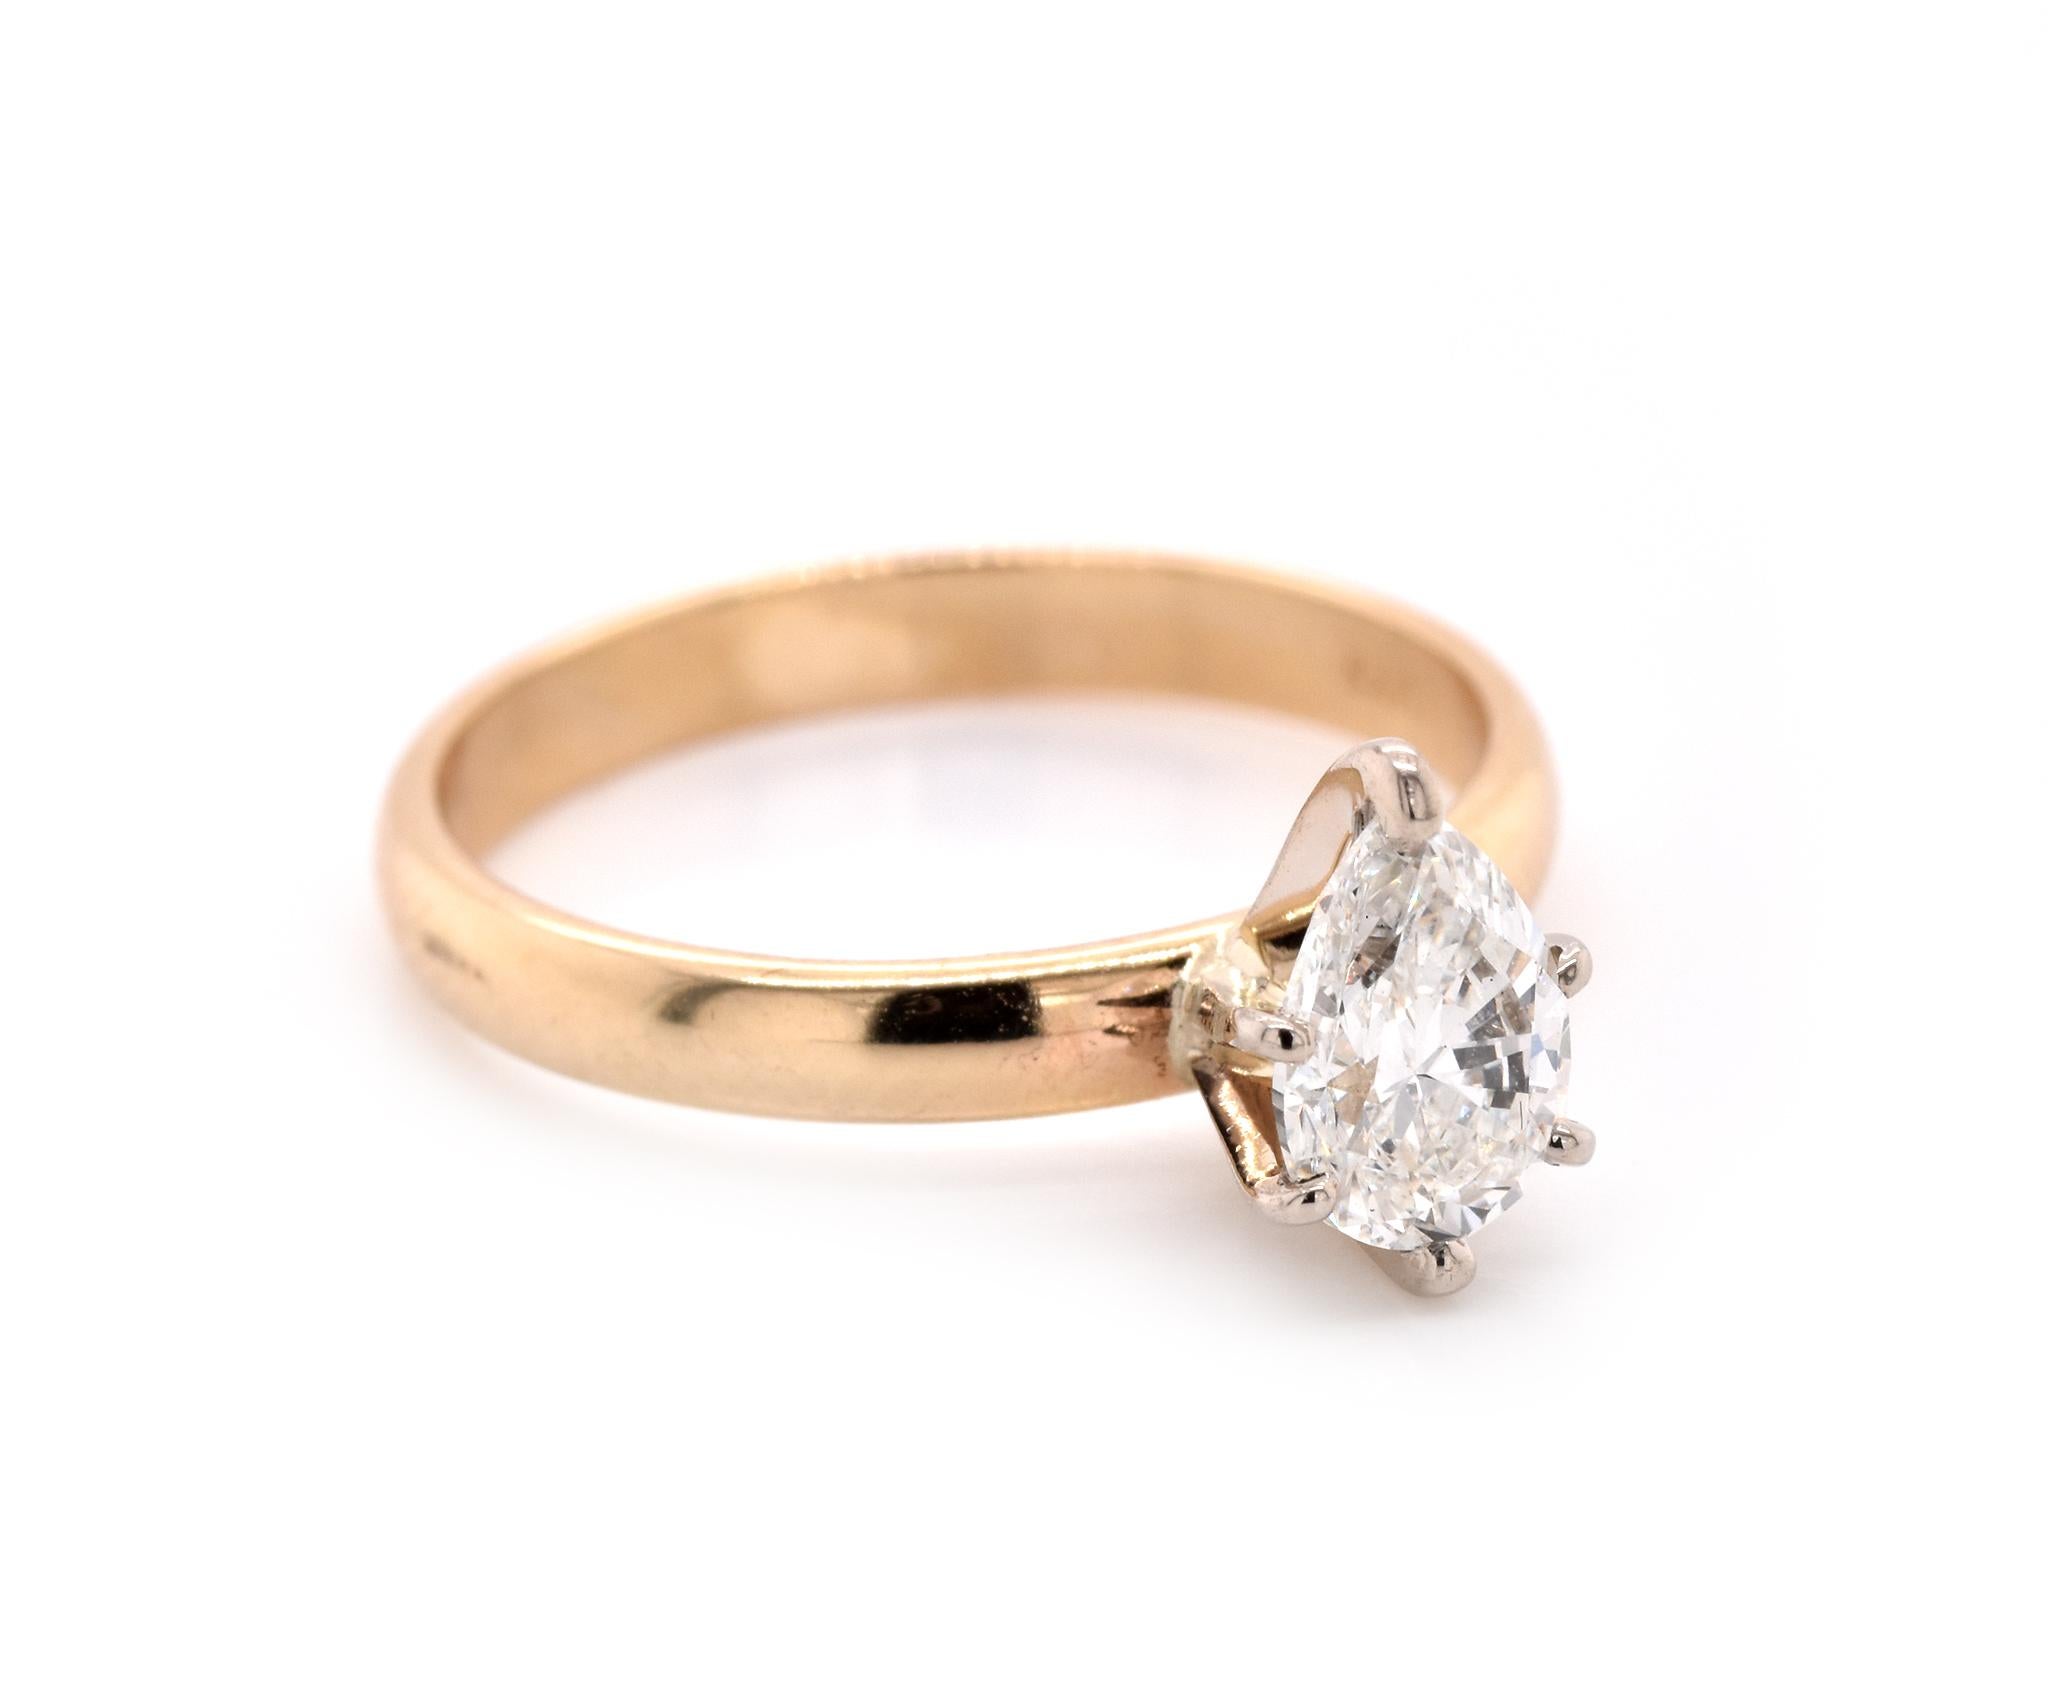 Material: 14k yellow gold
Center Diamond: 1 pear cut = .71ct
Color: H
Clarity: VS2
Ring Size: 6 (please allow up to 2 additional business days for sizing requests)
Dimensions: Ring measures 2.7mm in diameter 
Weight: 2.38 grams
